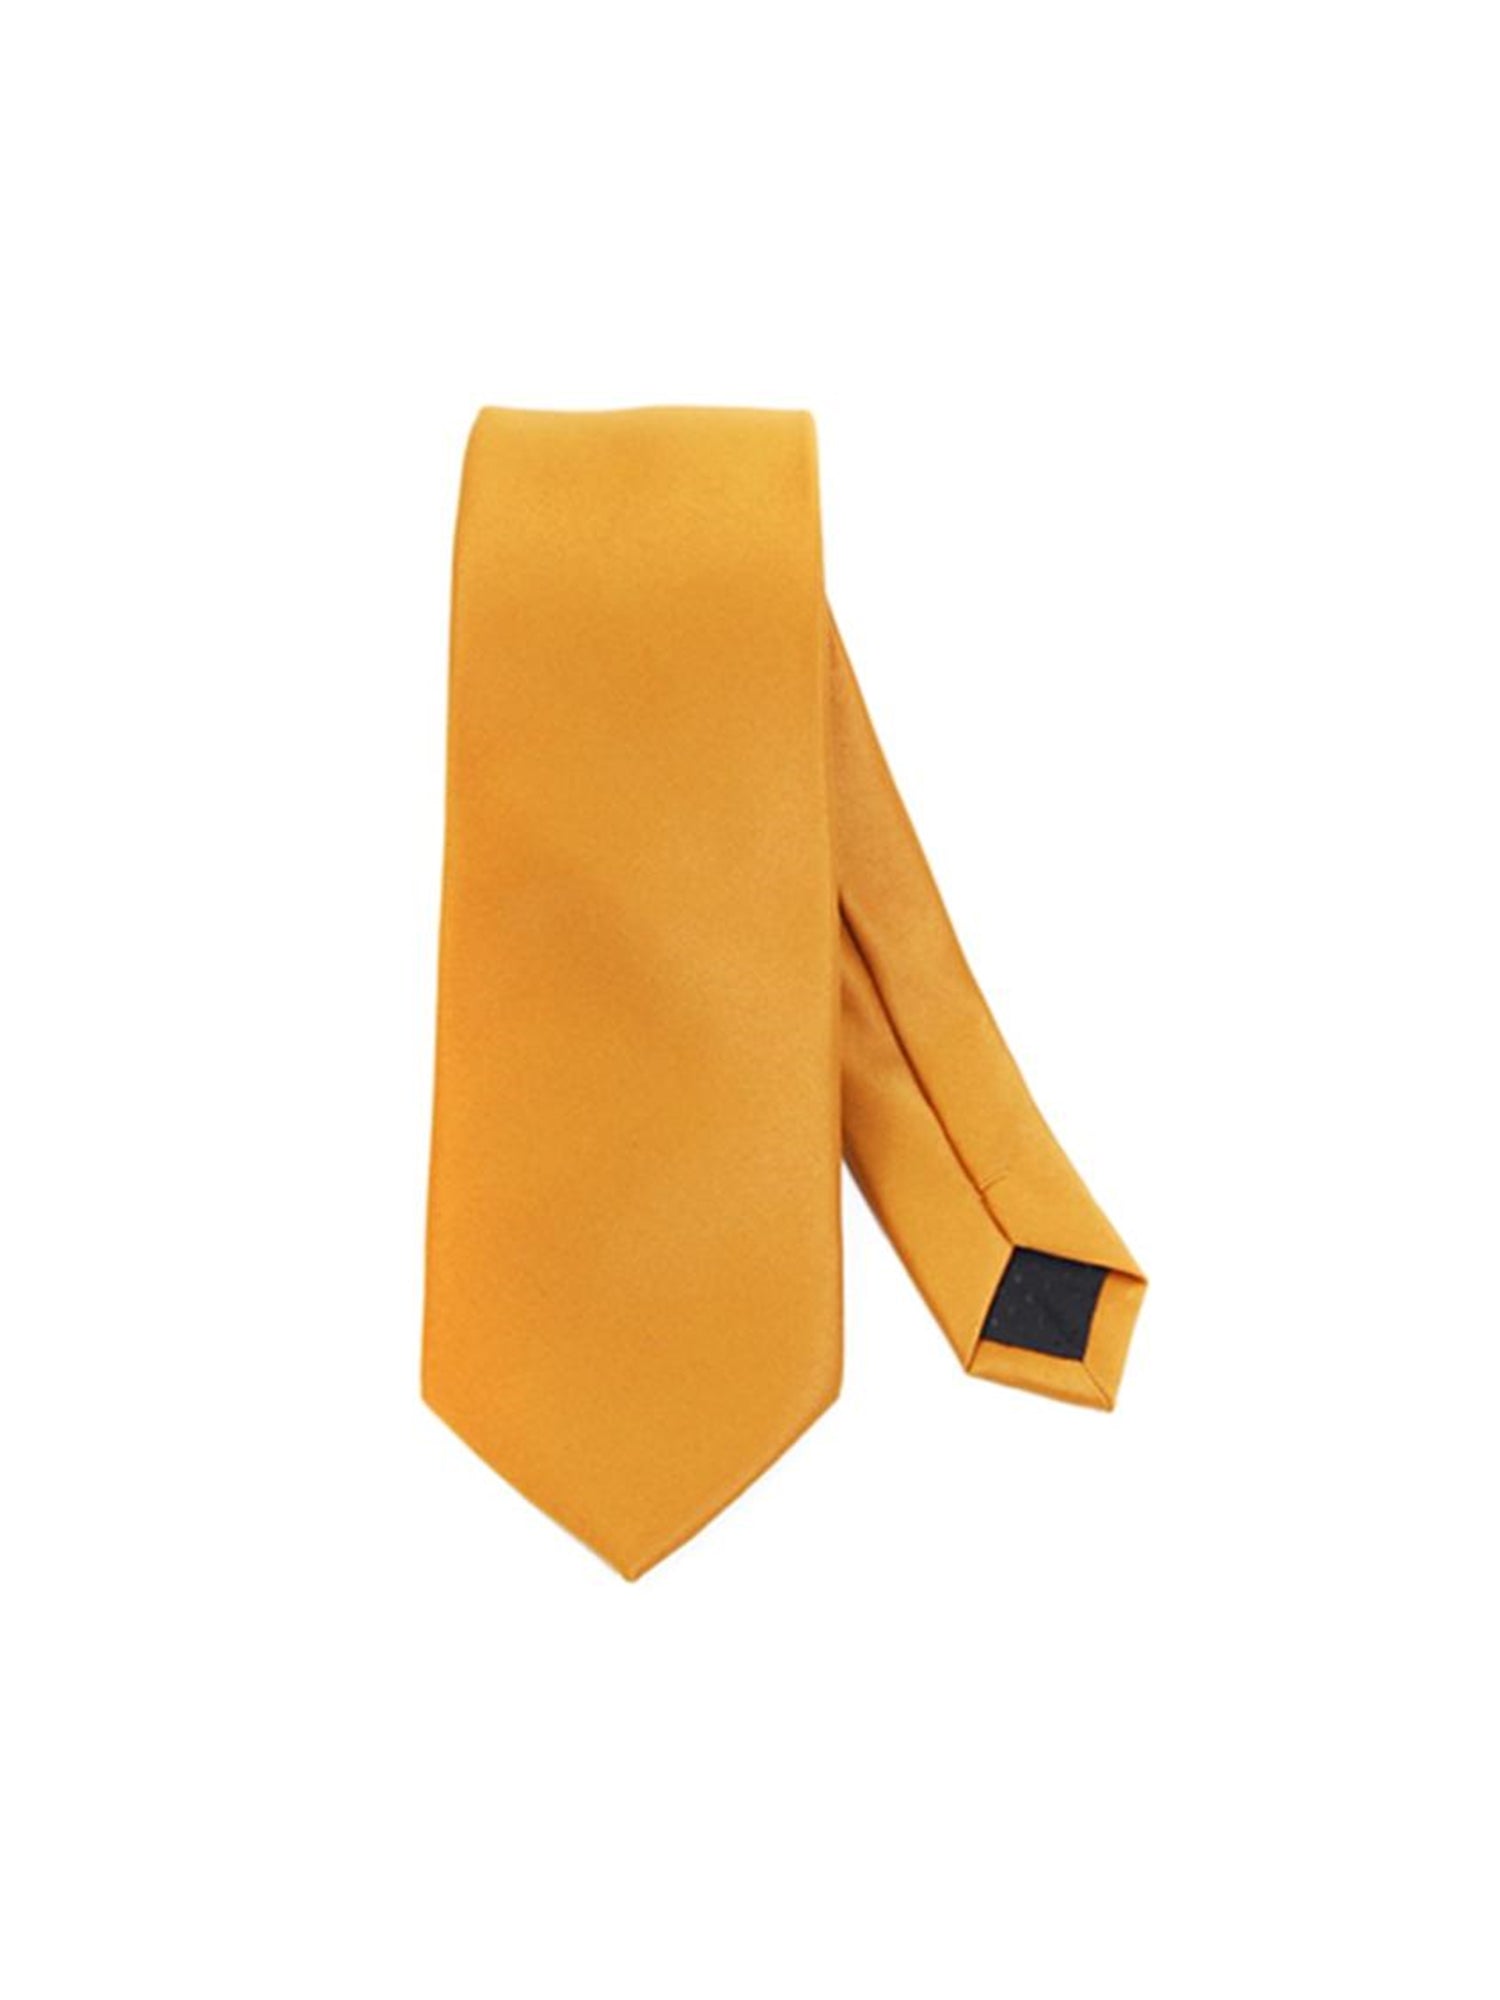 Men's Solid Color 2.75 Inch Wide And 57 Inch Long Slim Neckties Neck Tie TheDapperTie Gold  